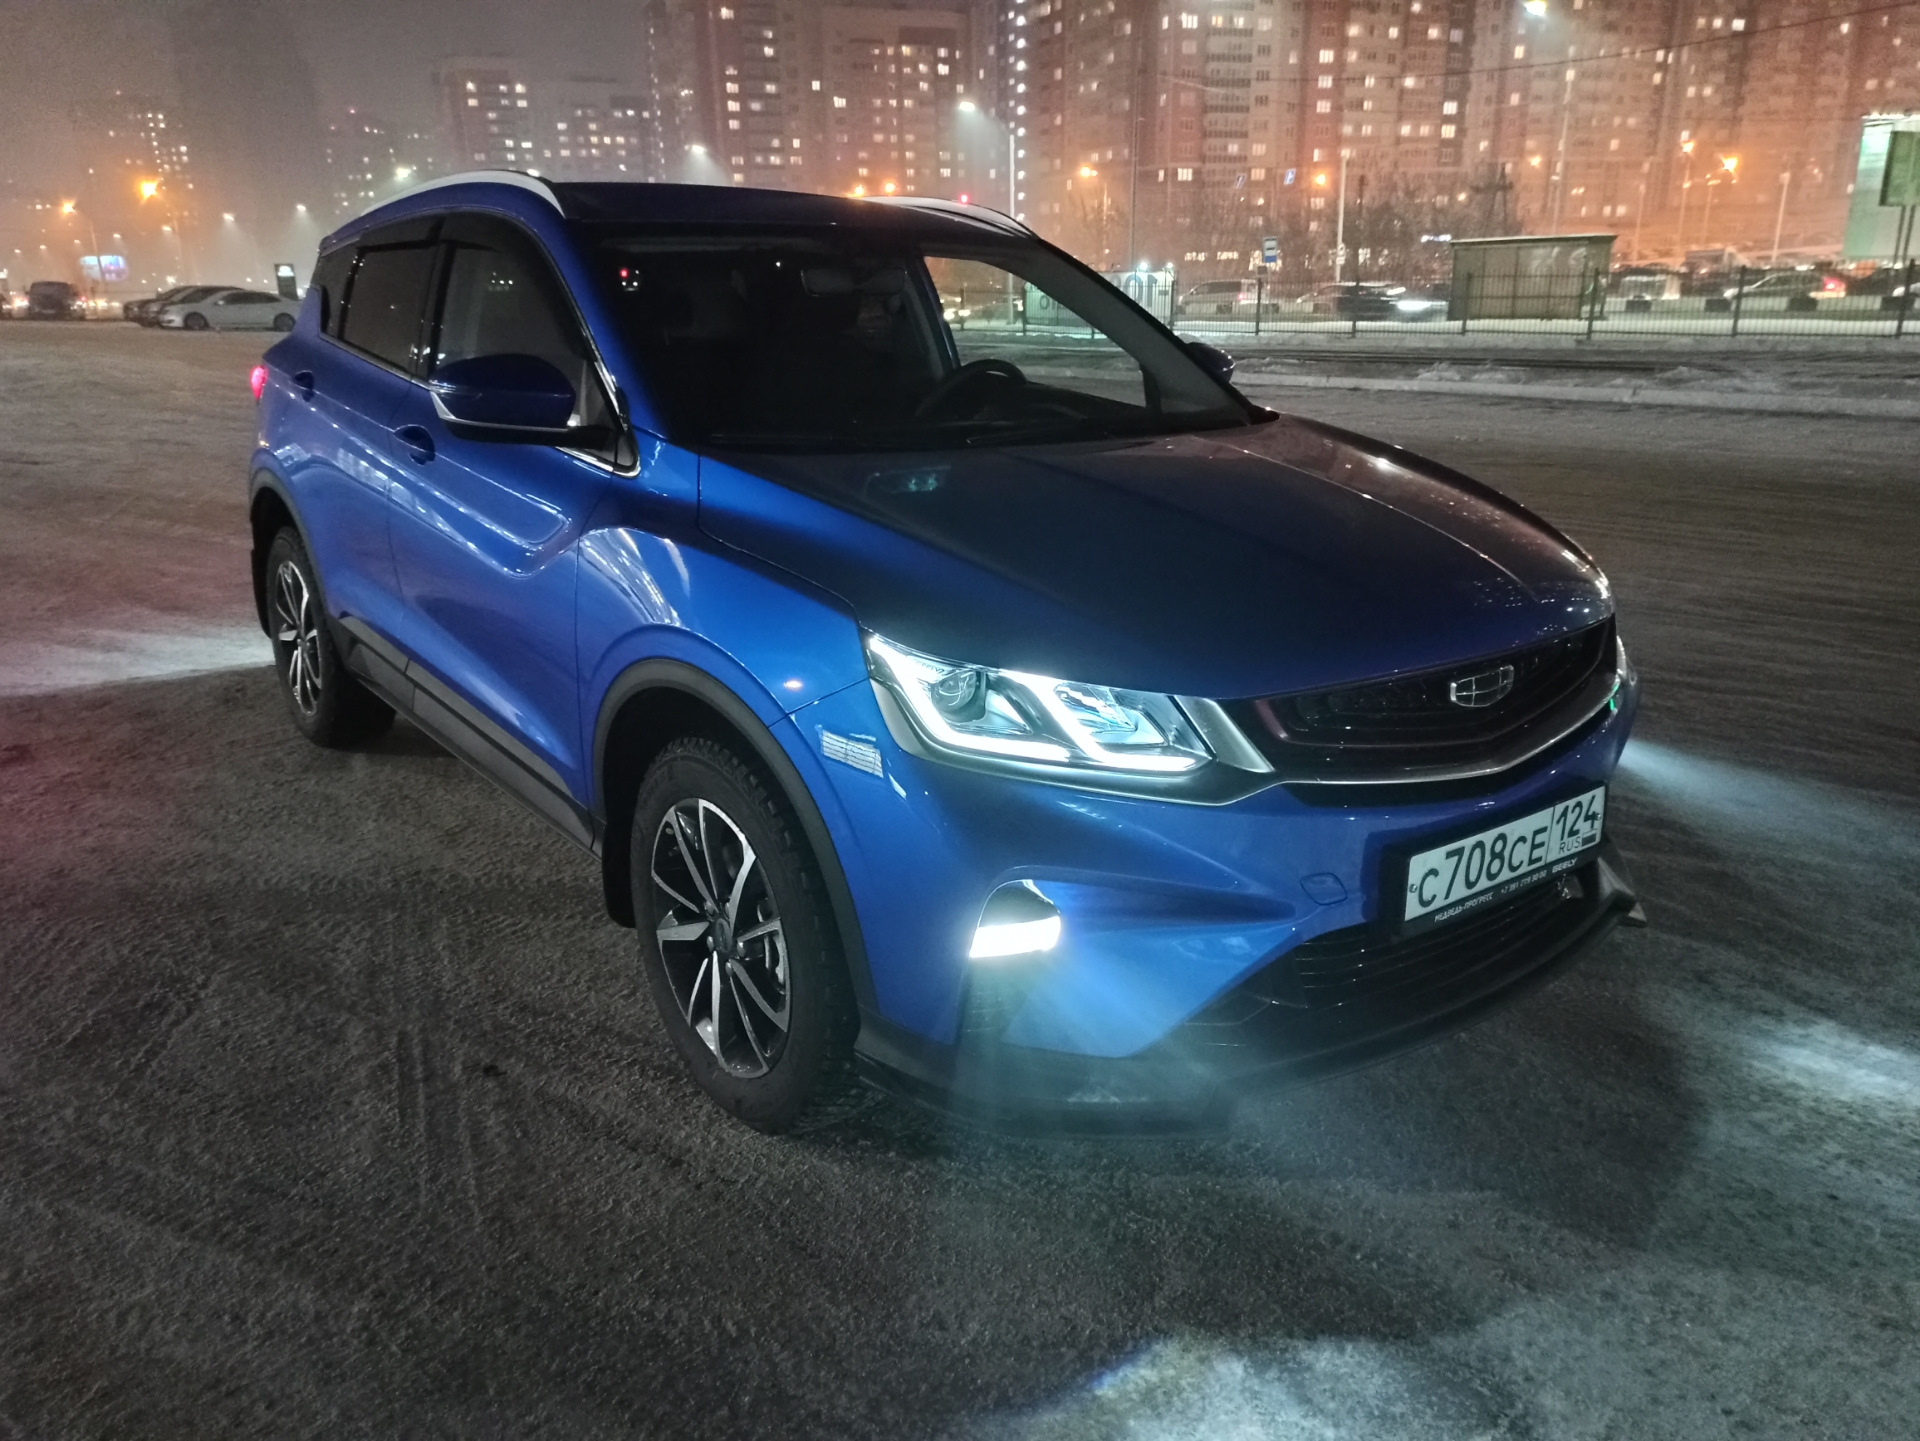 Geely coolray luxury. Geely Coolray синий. Geely Coolray 2022 синяя. Geely Coolray 2020 цвета. Машина Geely Coolray.